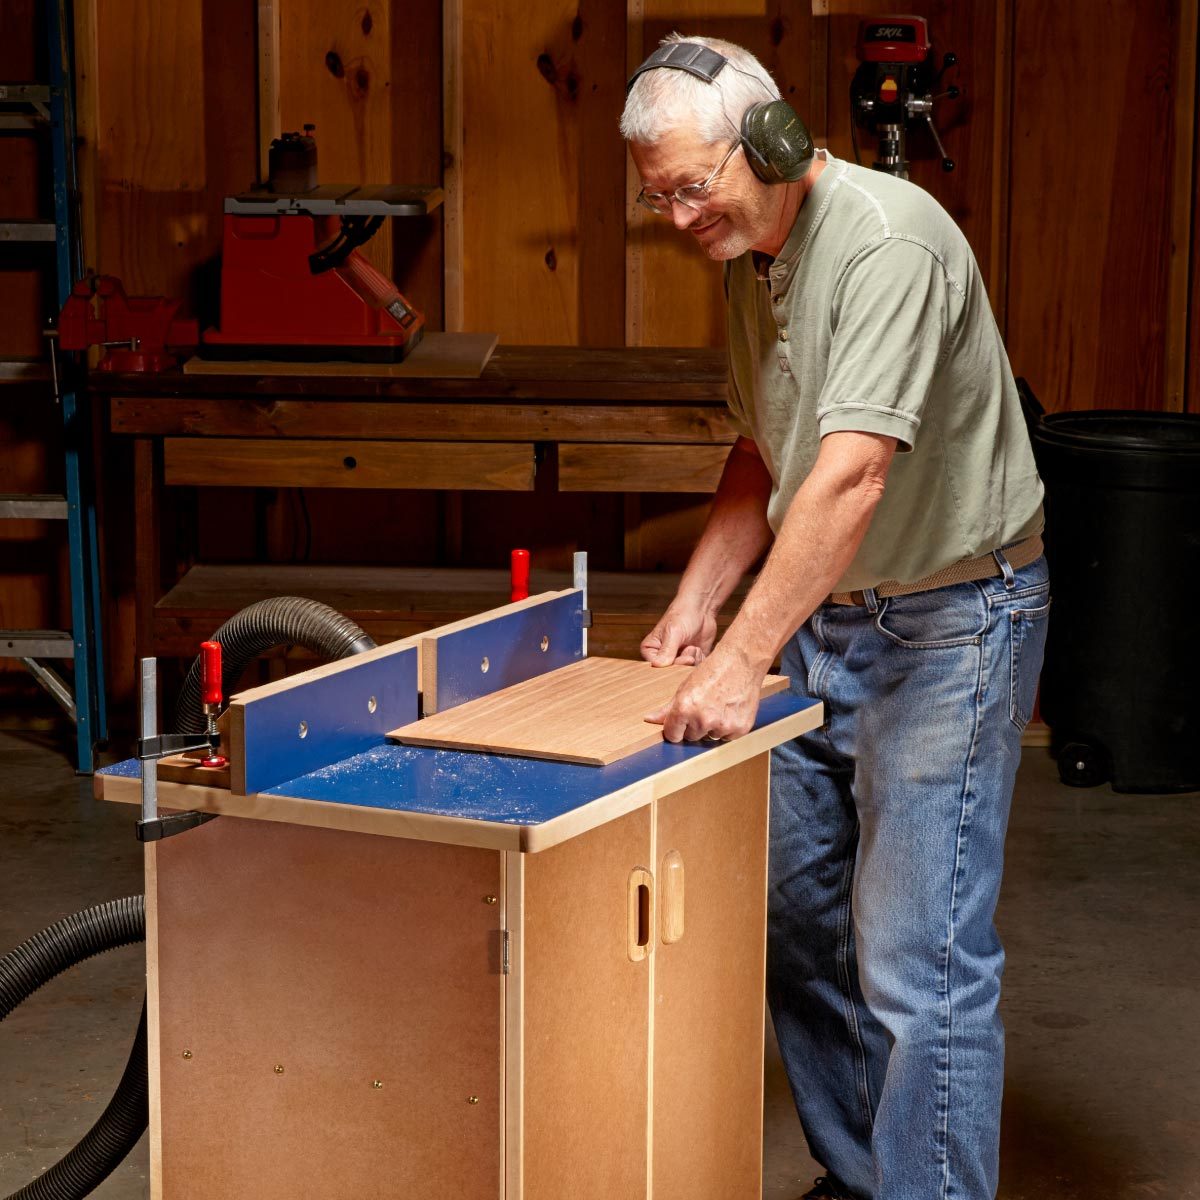 Router Tables - Woodworking Projects